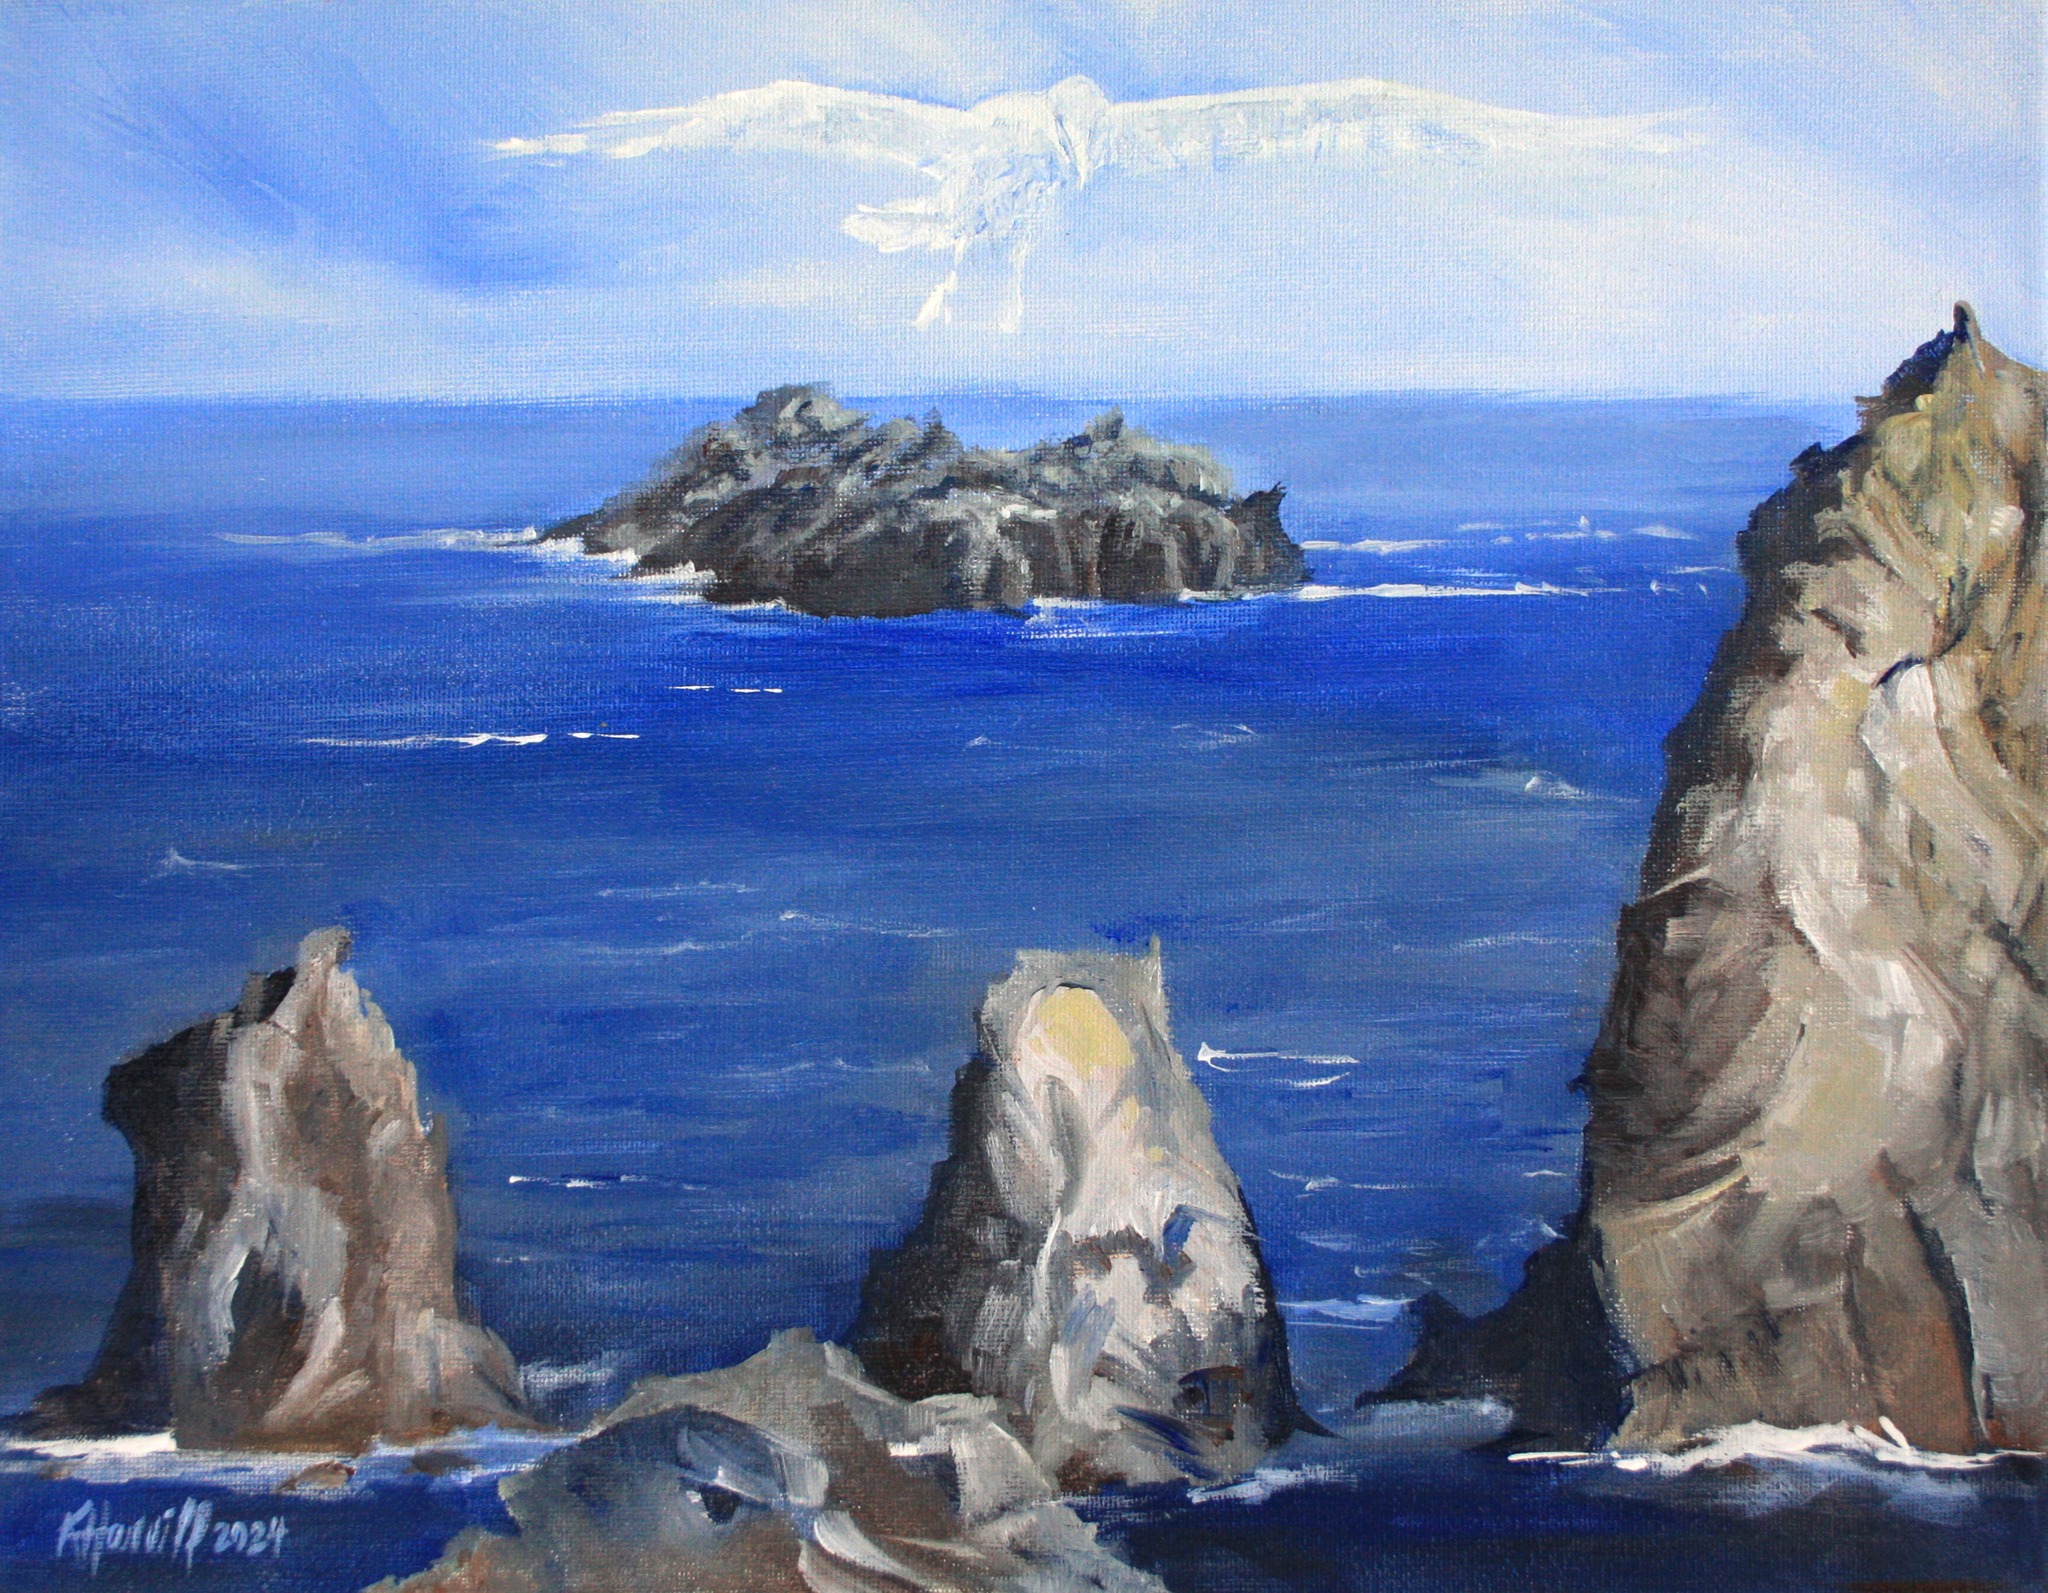 Kitty Harvill The Guardians 11 x 14 ins acrylic on canvas 5 Albatrosses hidden in the sky and rockscan you find them all